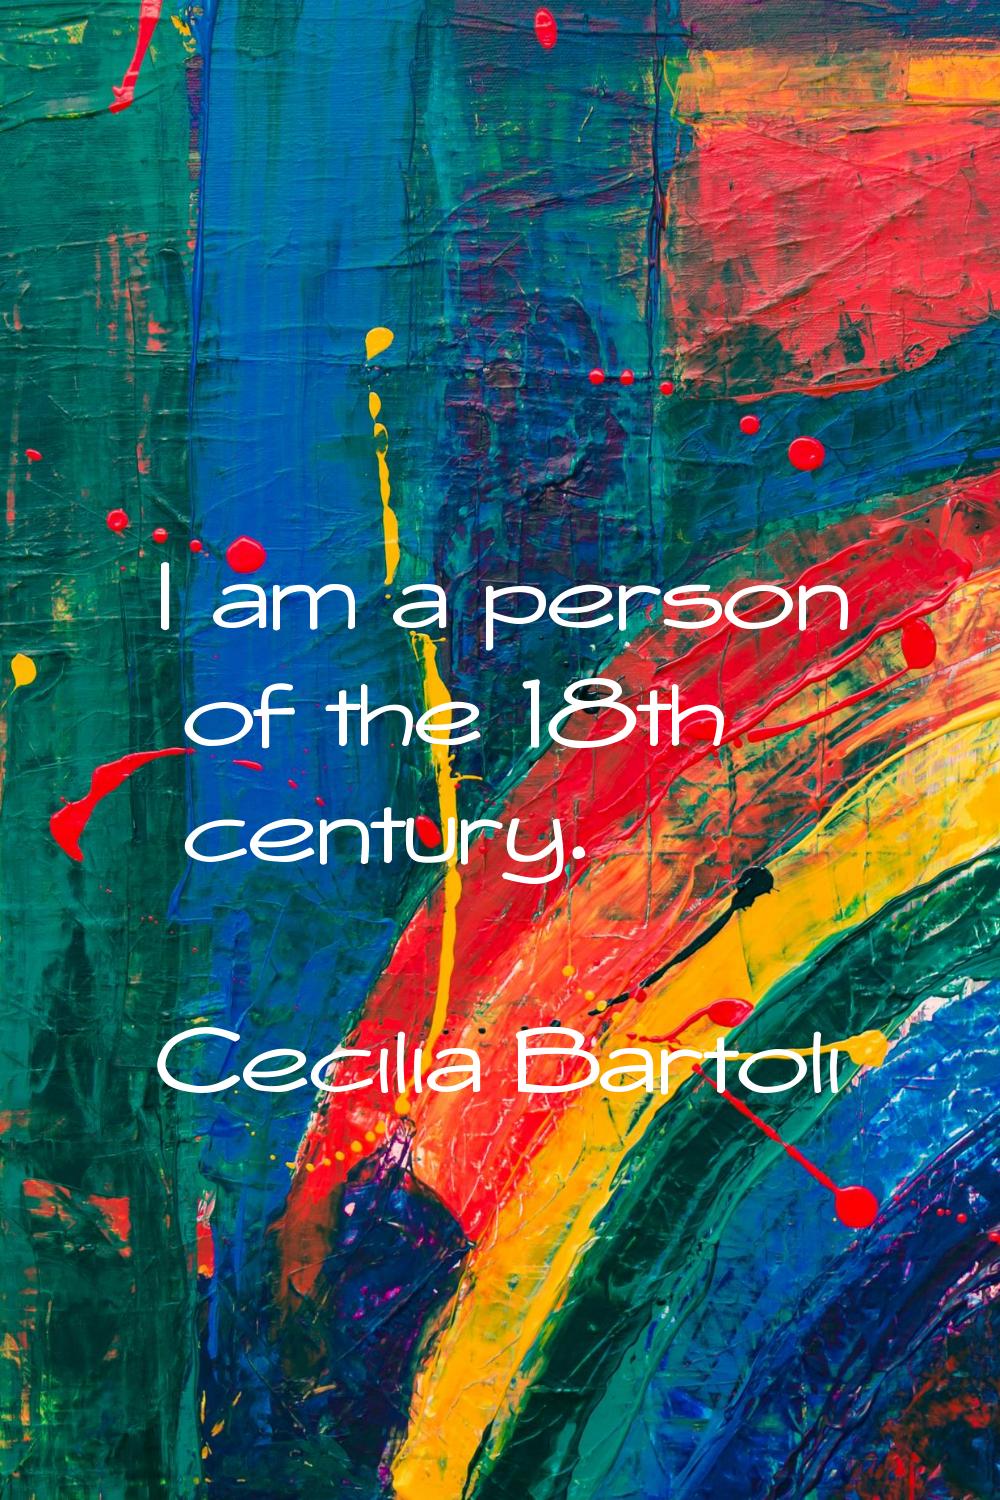 I am a person of the 18th century.